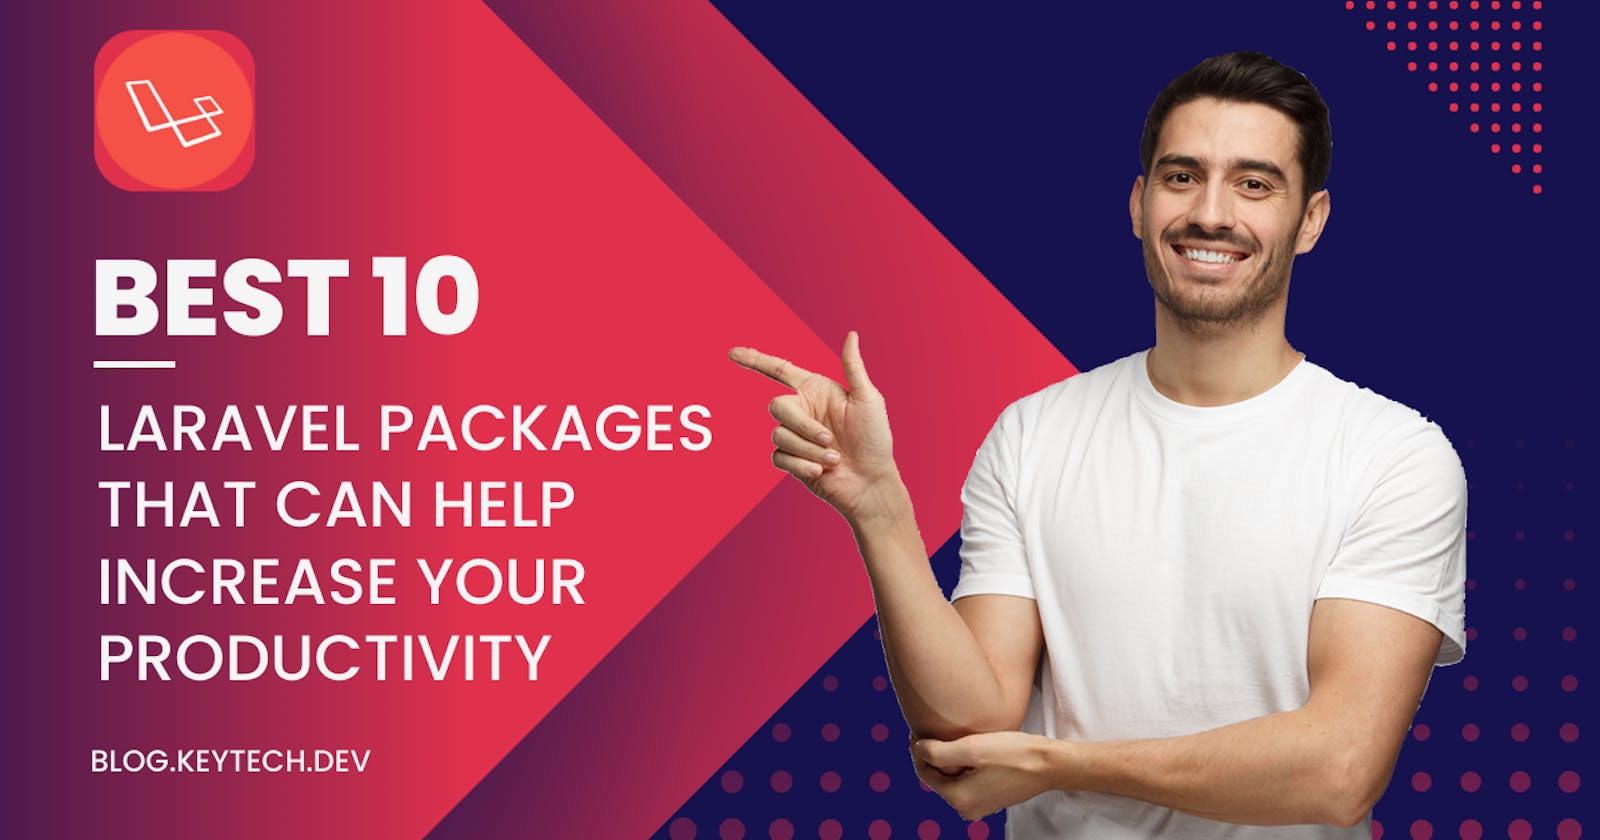 Best 10 Laravel packages that can increase productivity